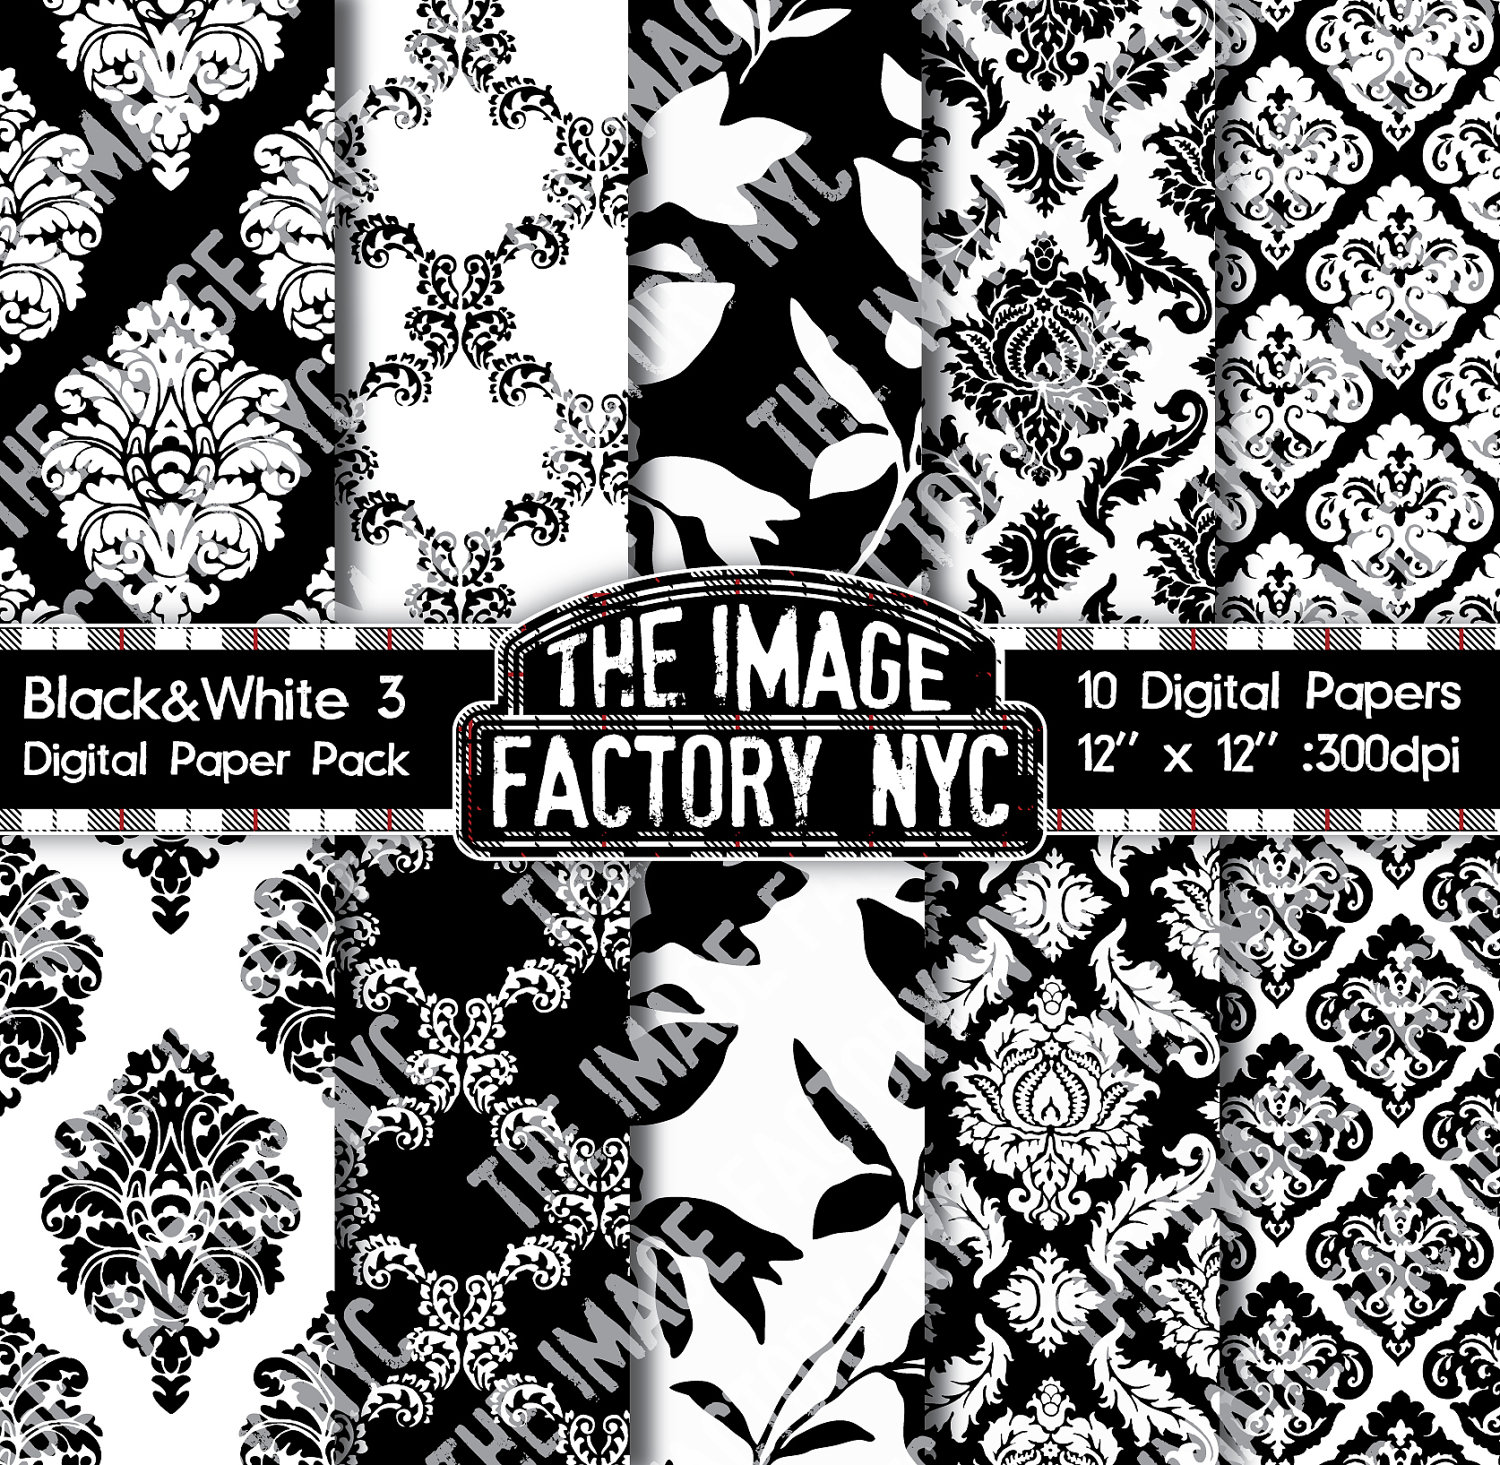 Black White Vintage Wallpaper And Damask By Theimagefactorynyc